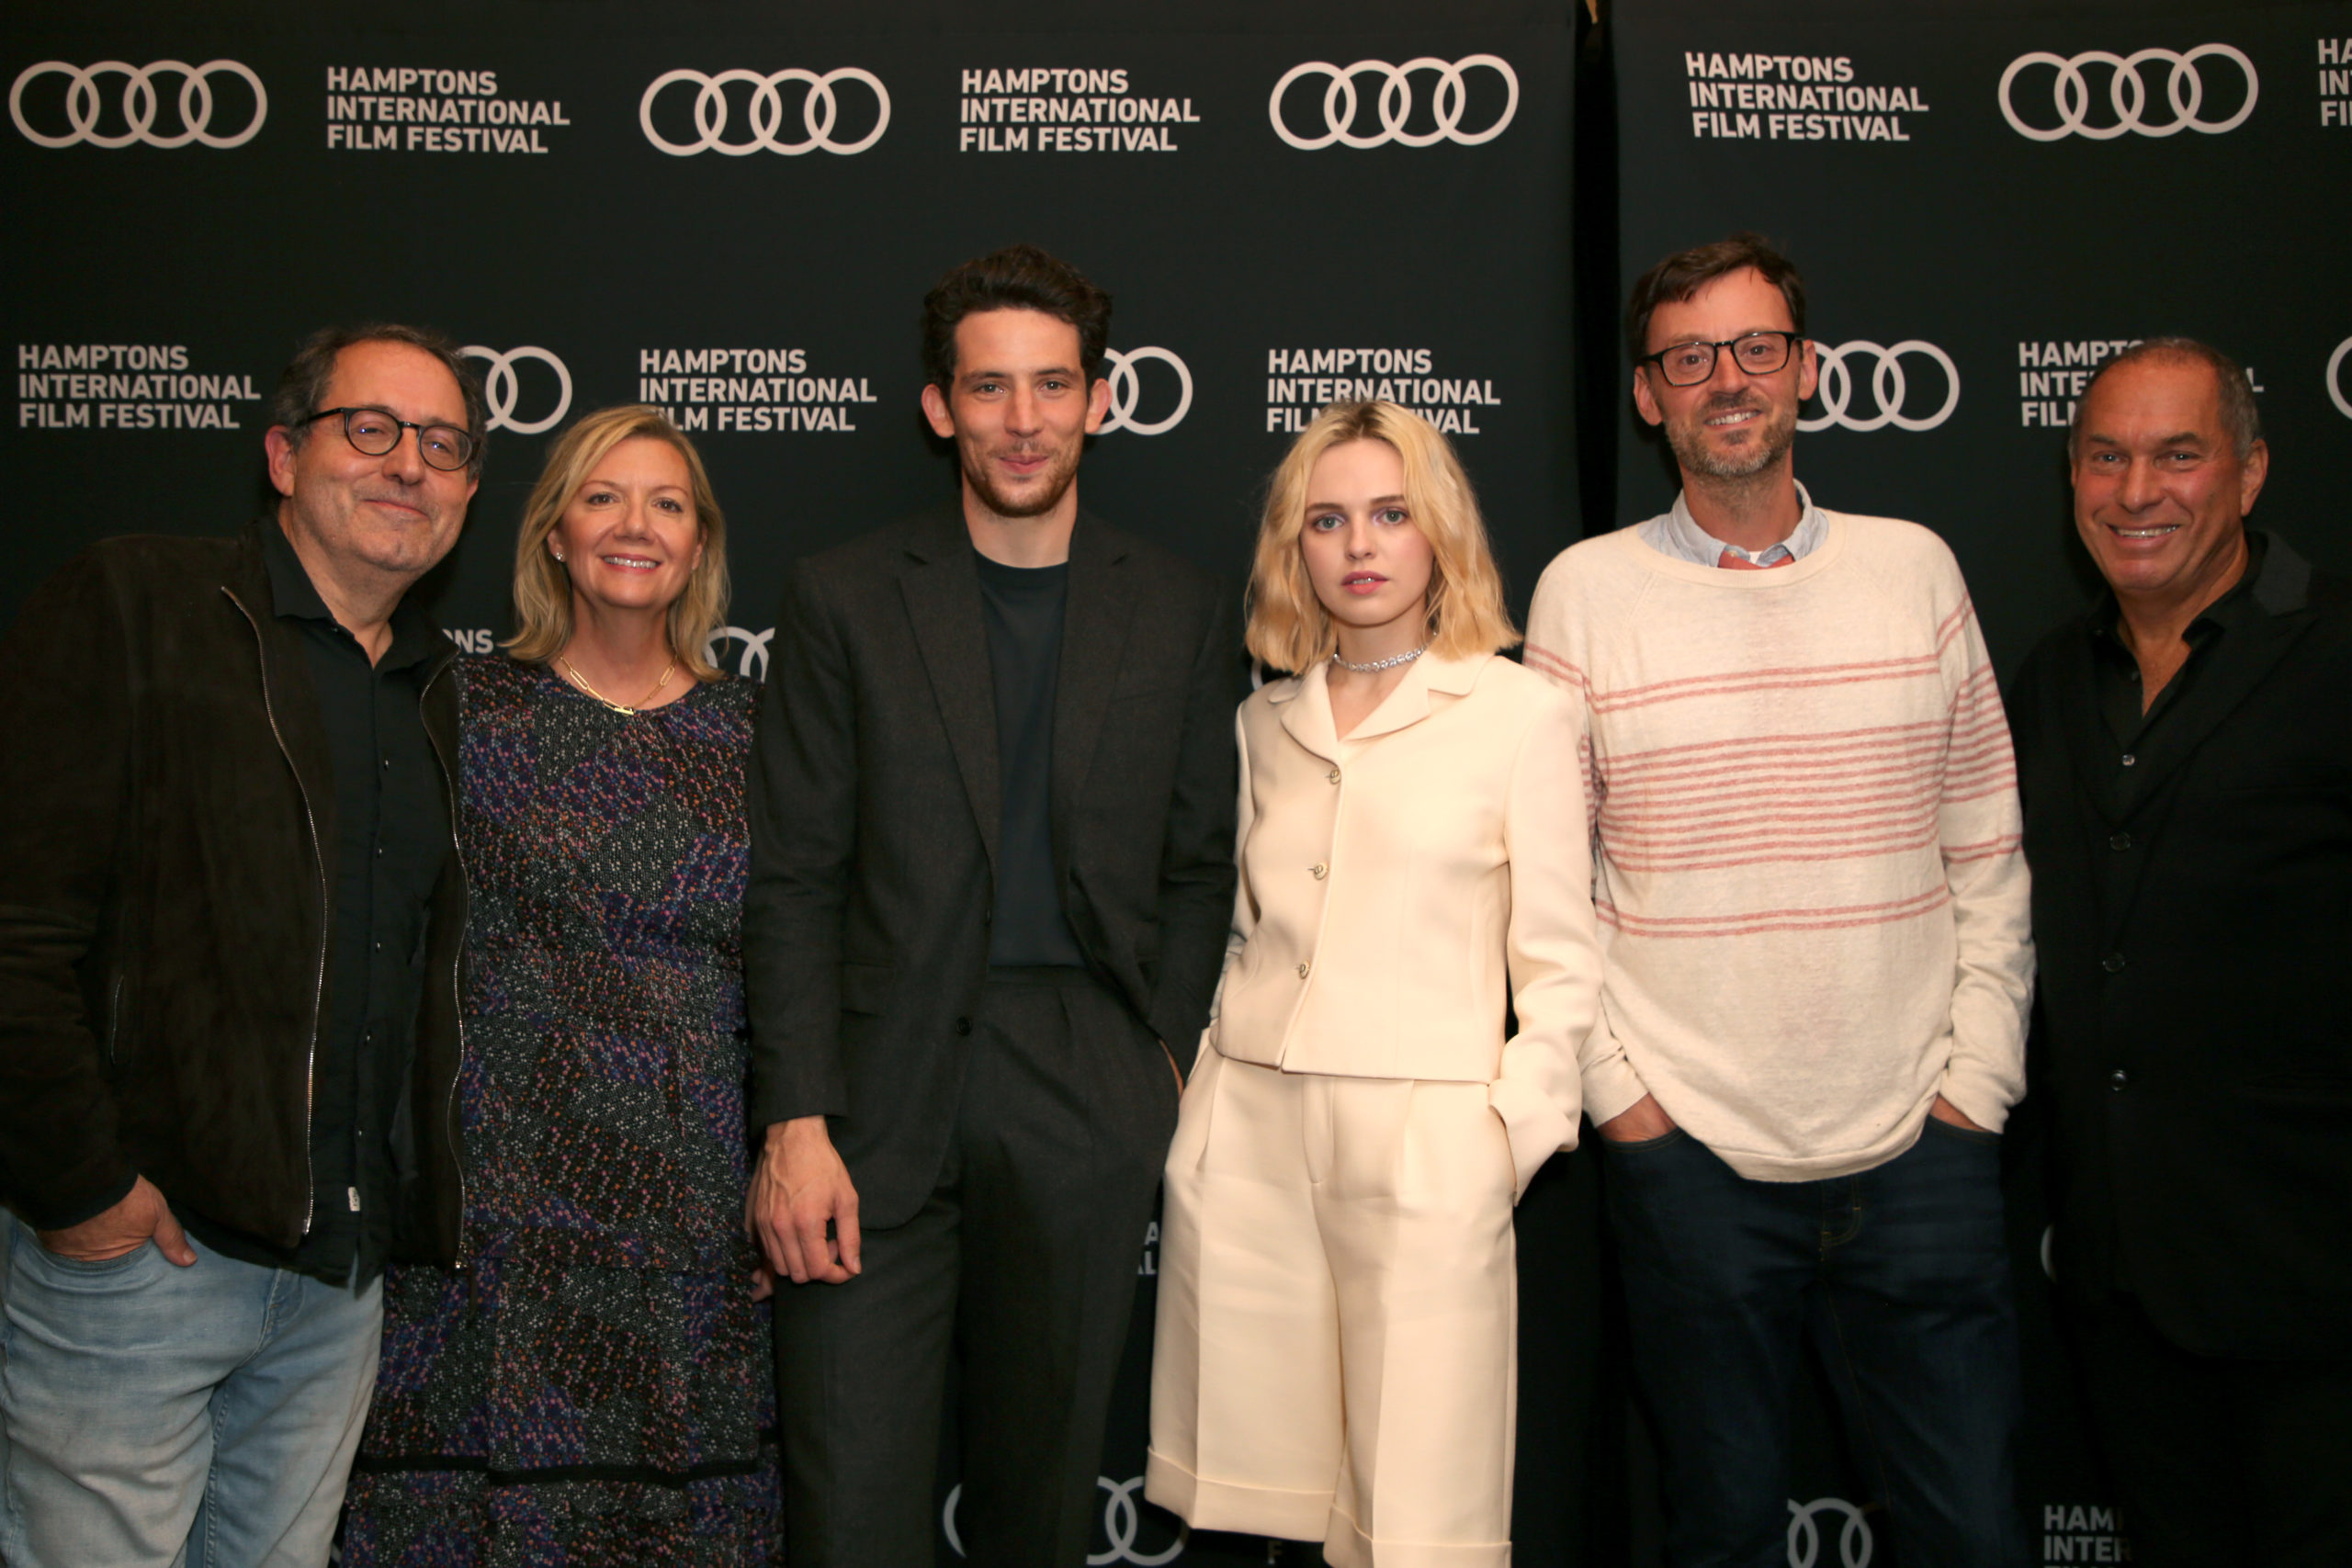 From left, Michael Barker, Anne Chaisson, Josh O'Connor, Odessa Young, David Nugent and Stuart Match Suna at the 29th annual Hamptons International Film Festival.